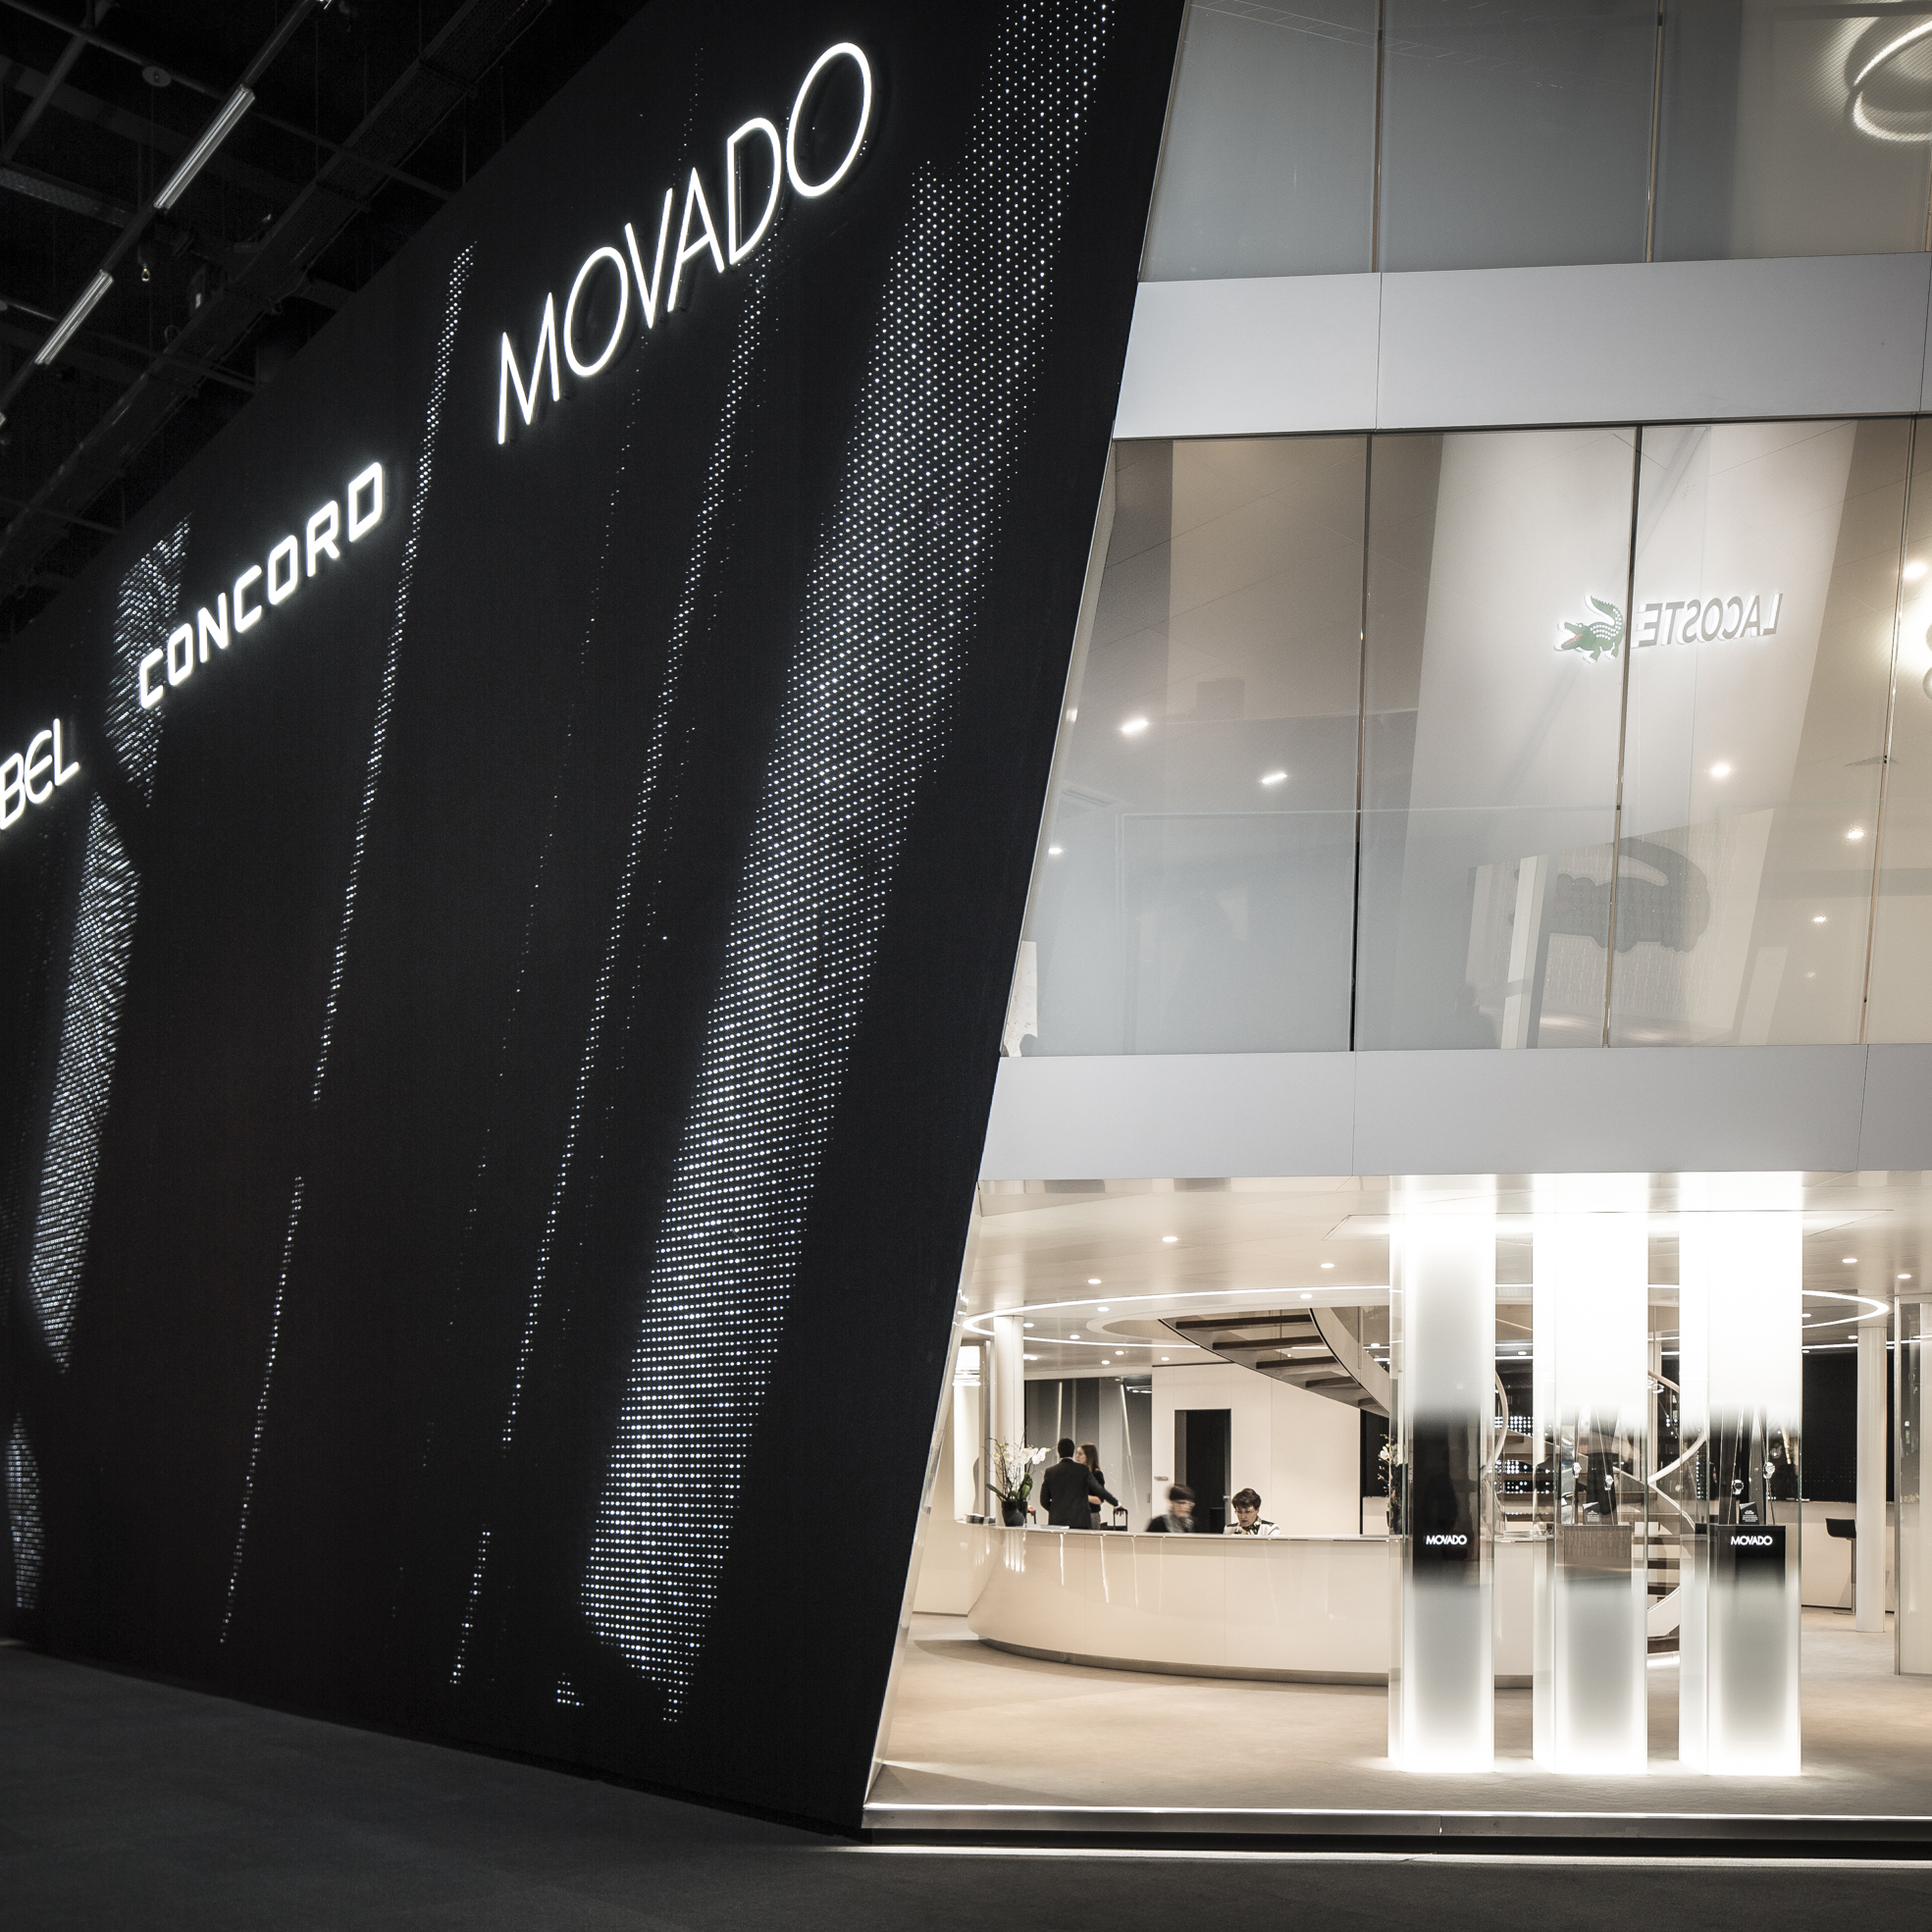 Movado-Booth-Baselworld-exhibition-watch display-watch stand-counter-window-POS material